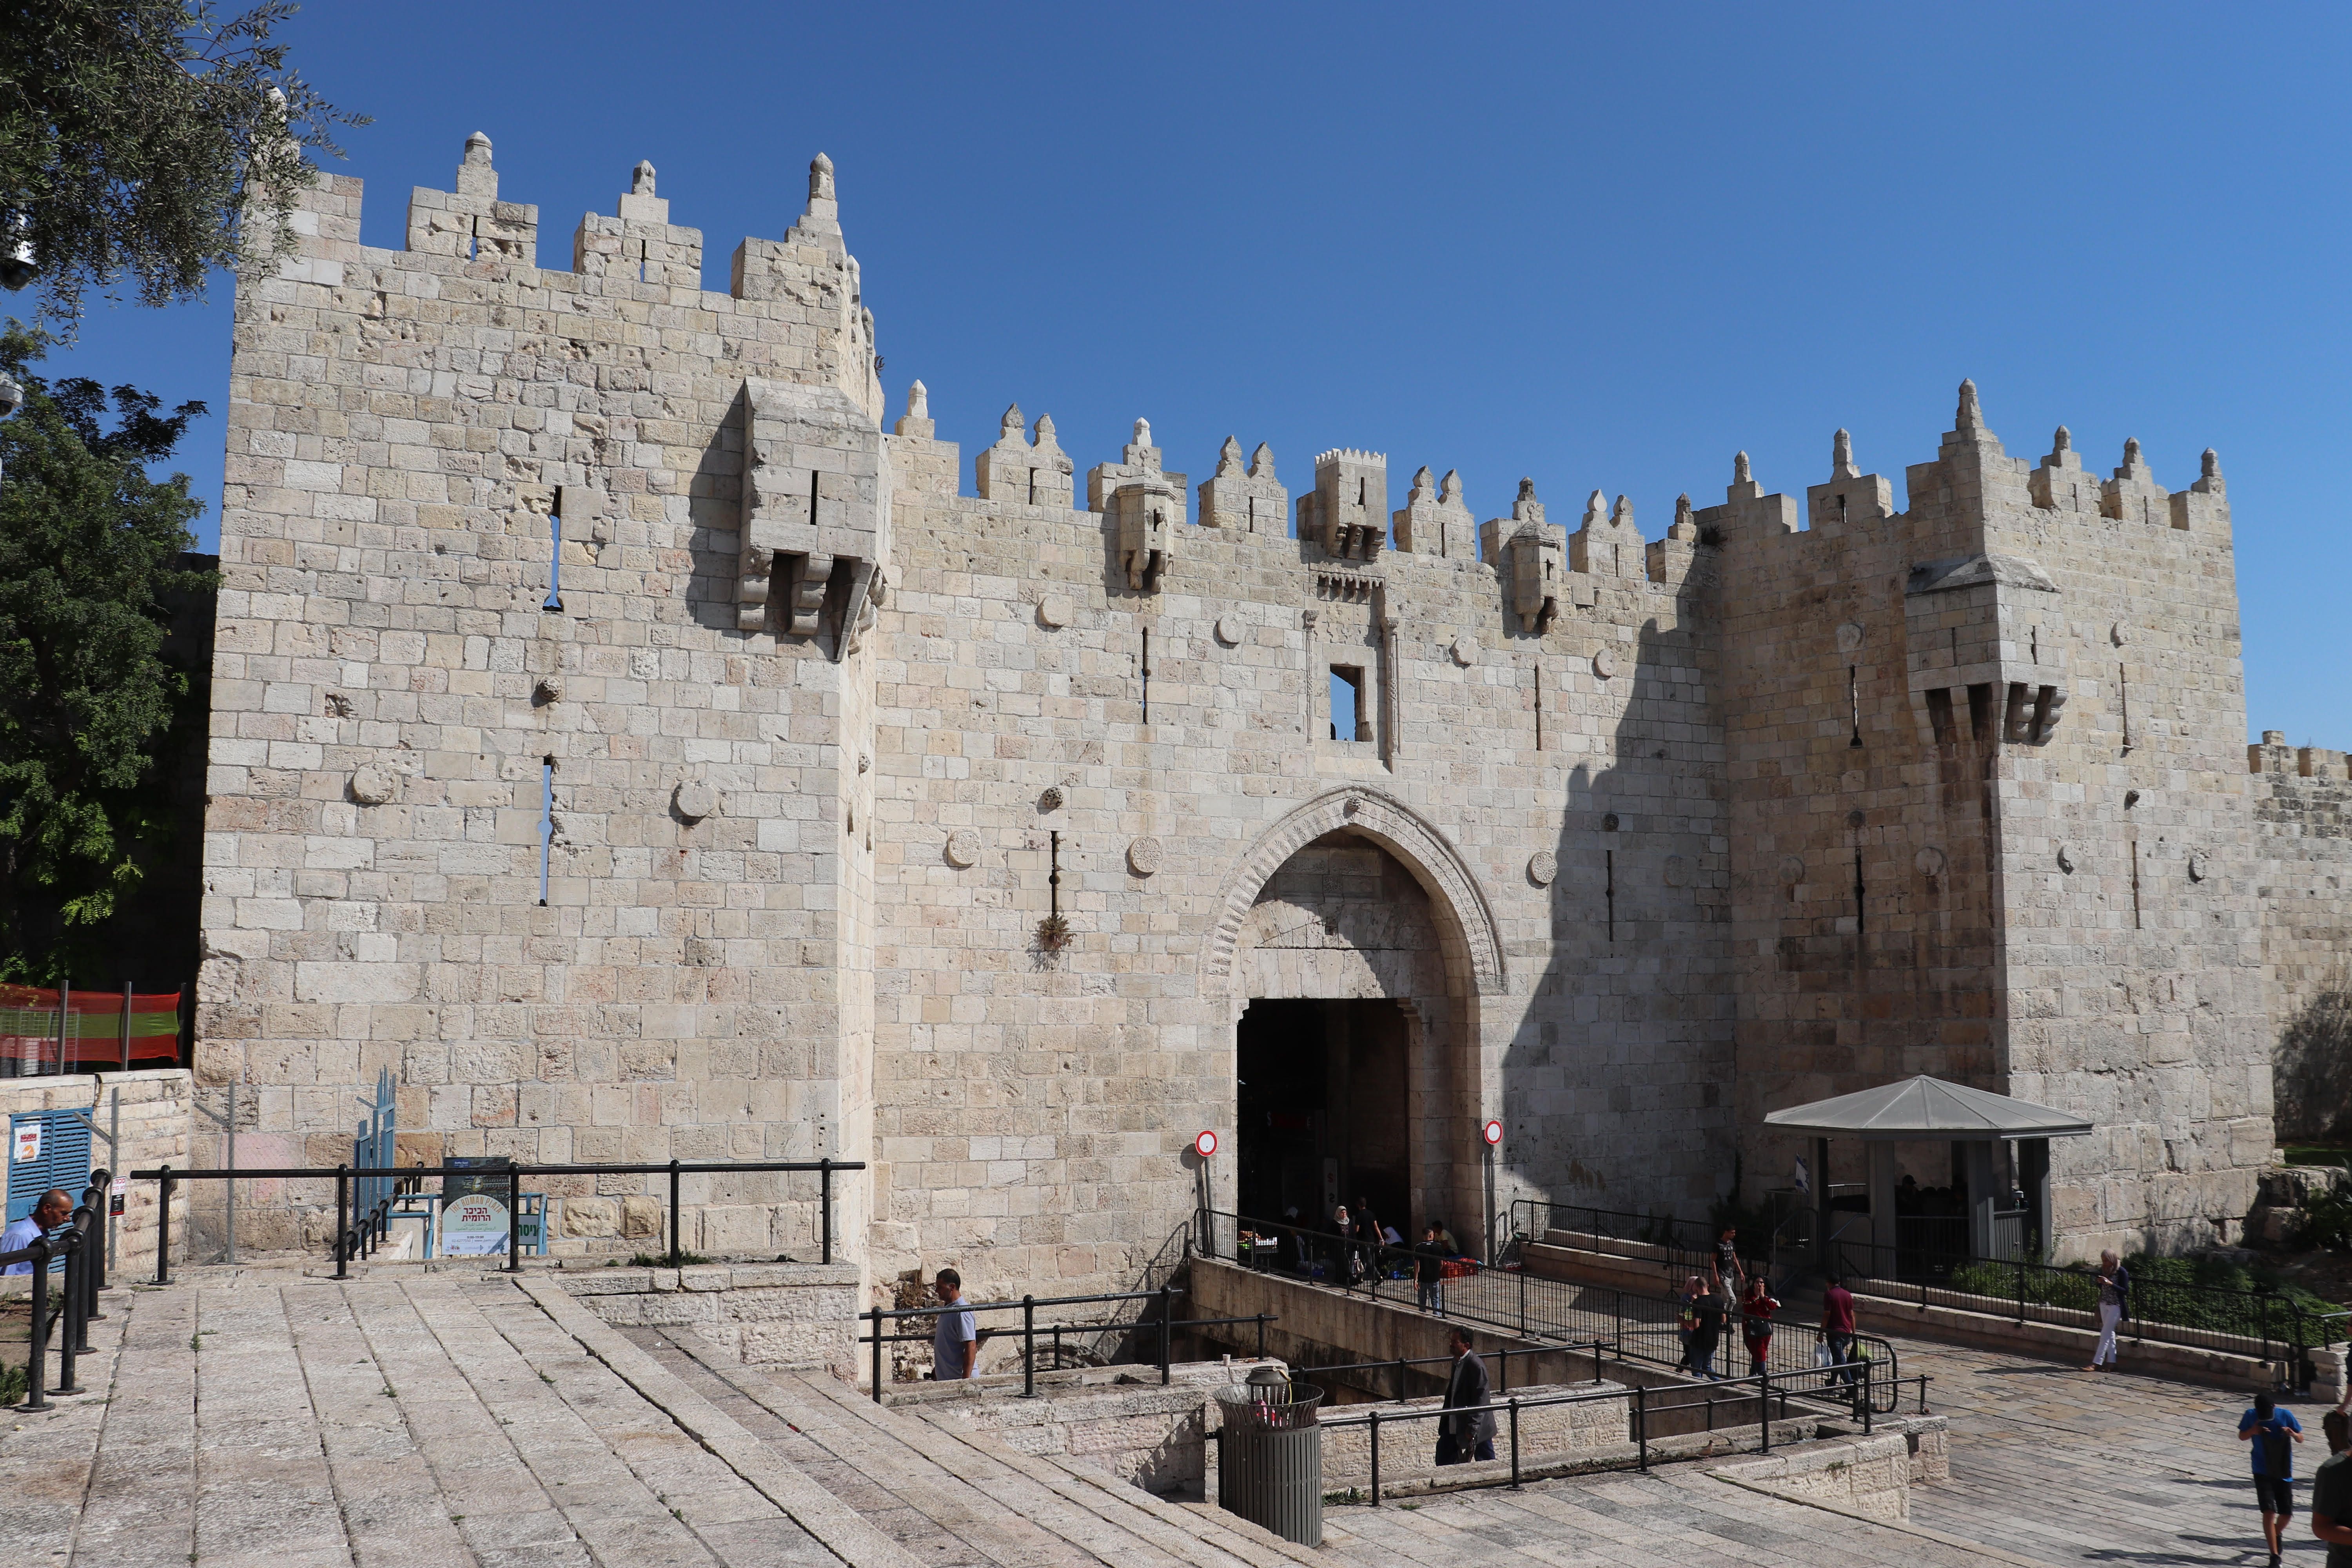 Damascus Gate, the entrance into the Muslim Quarter of Jerusalem's Old City. Image by Carly Graf. Israel, 2019.